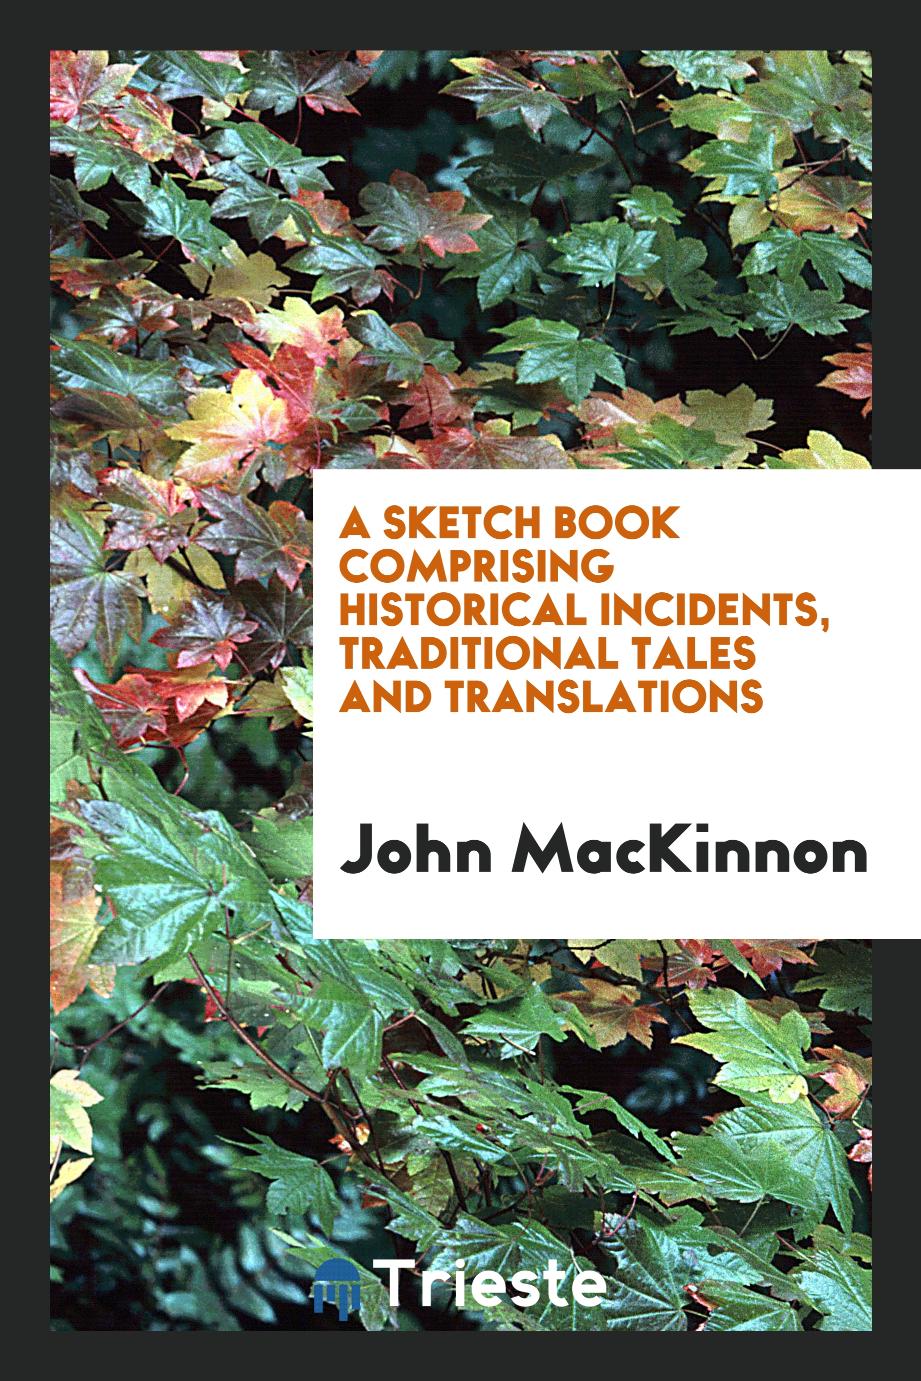 A sketch book comprising historical incidents, traditional tales and translations